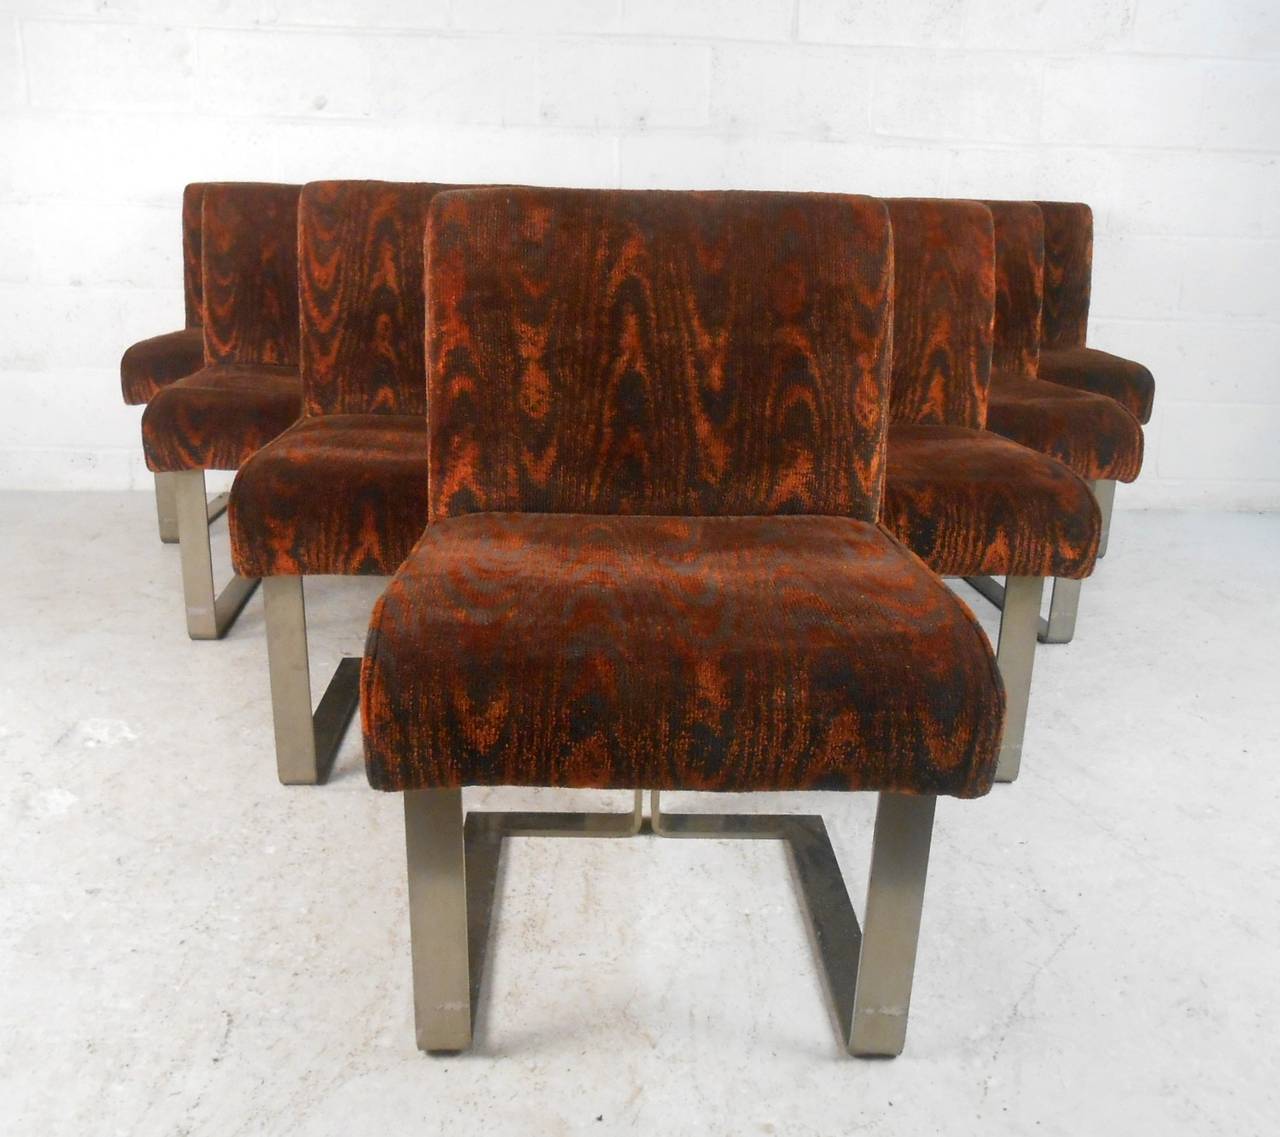 This beautiful and unique set of ten chairs feature remarkable Mid-Century design. Wonderful vintage upholstery covers these comfortable seats framed on substantial metal bases. Rare matching set with animal print upholstery, sturdy and stylish for